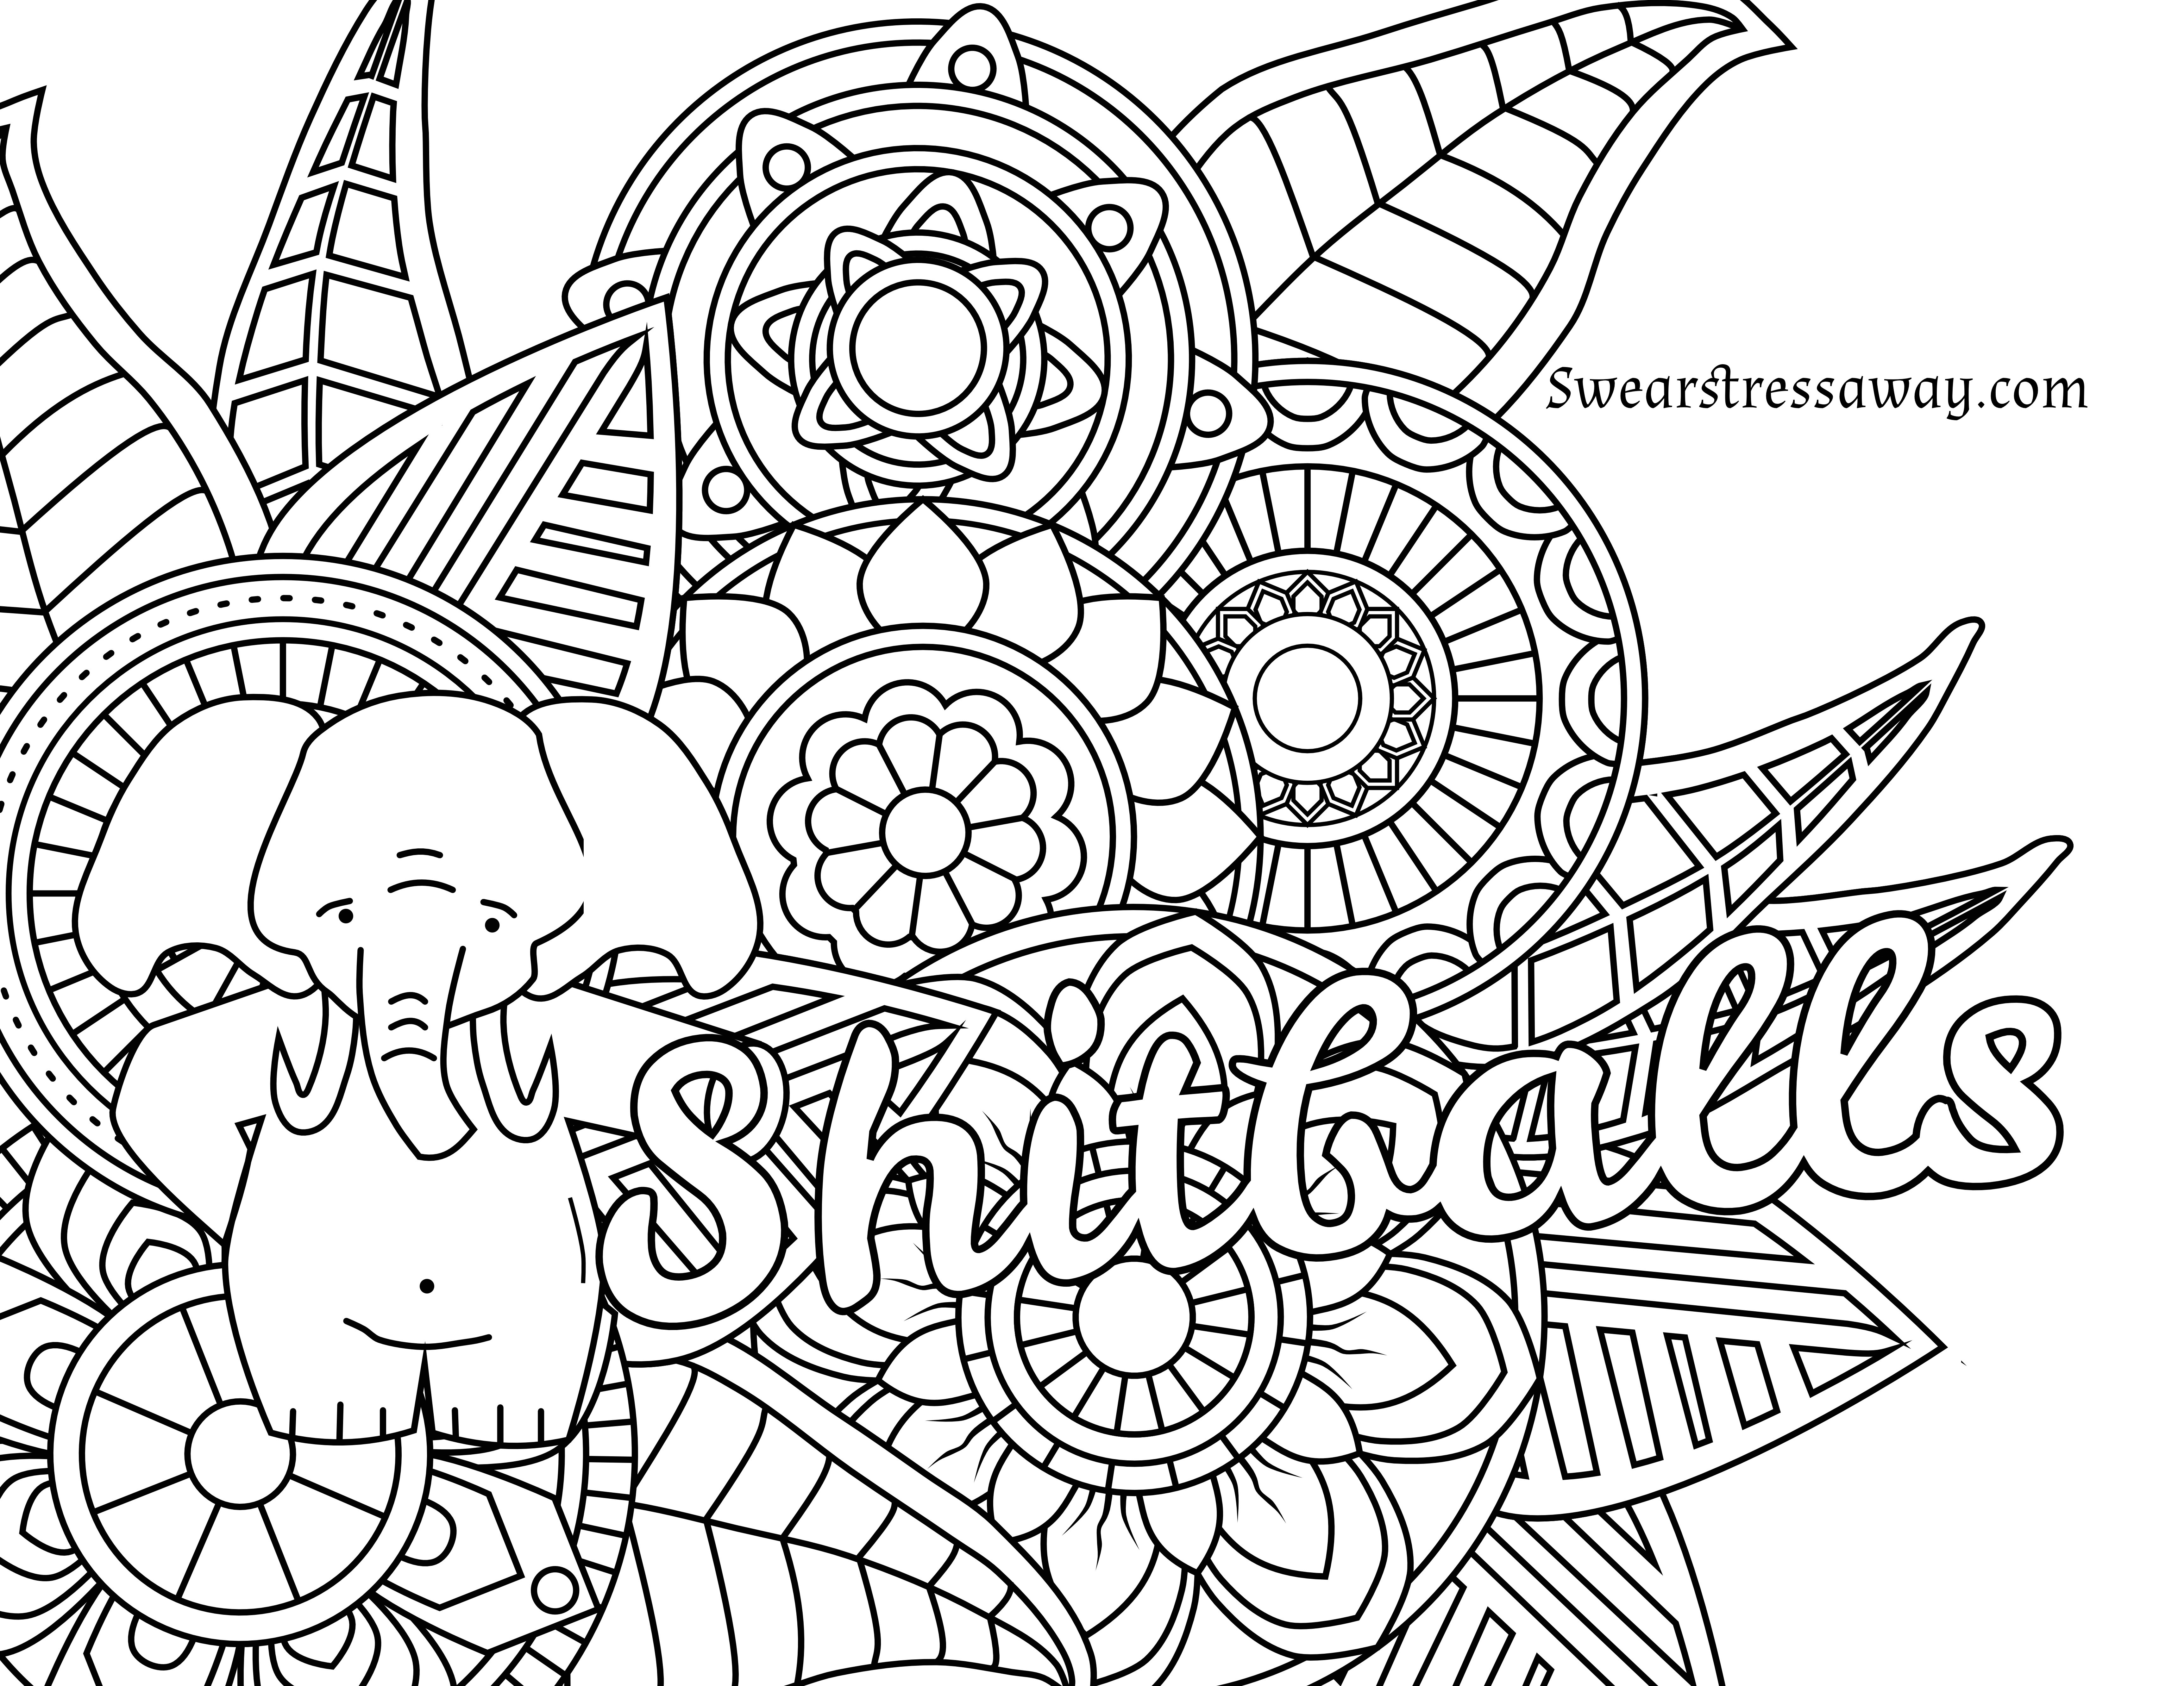 Free Printable Coloring Pages Adults Only Free Printable Coloring - Free Printable Coloring Pages For Adults Only